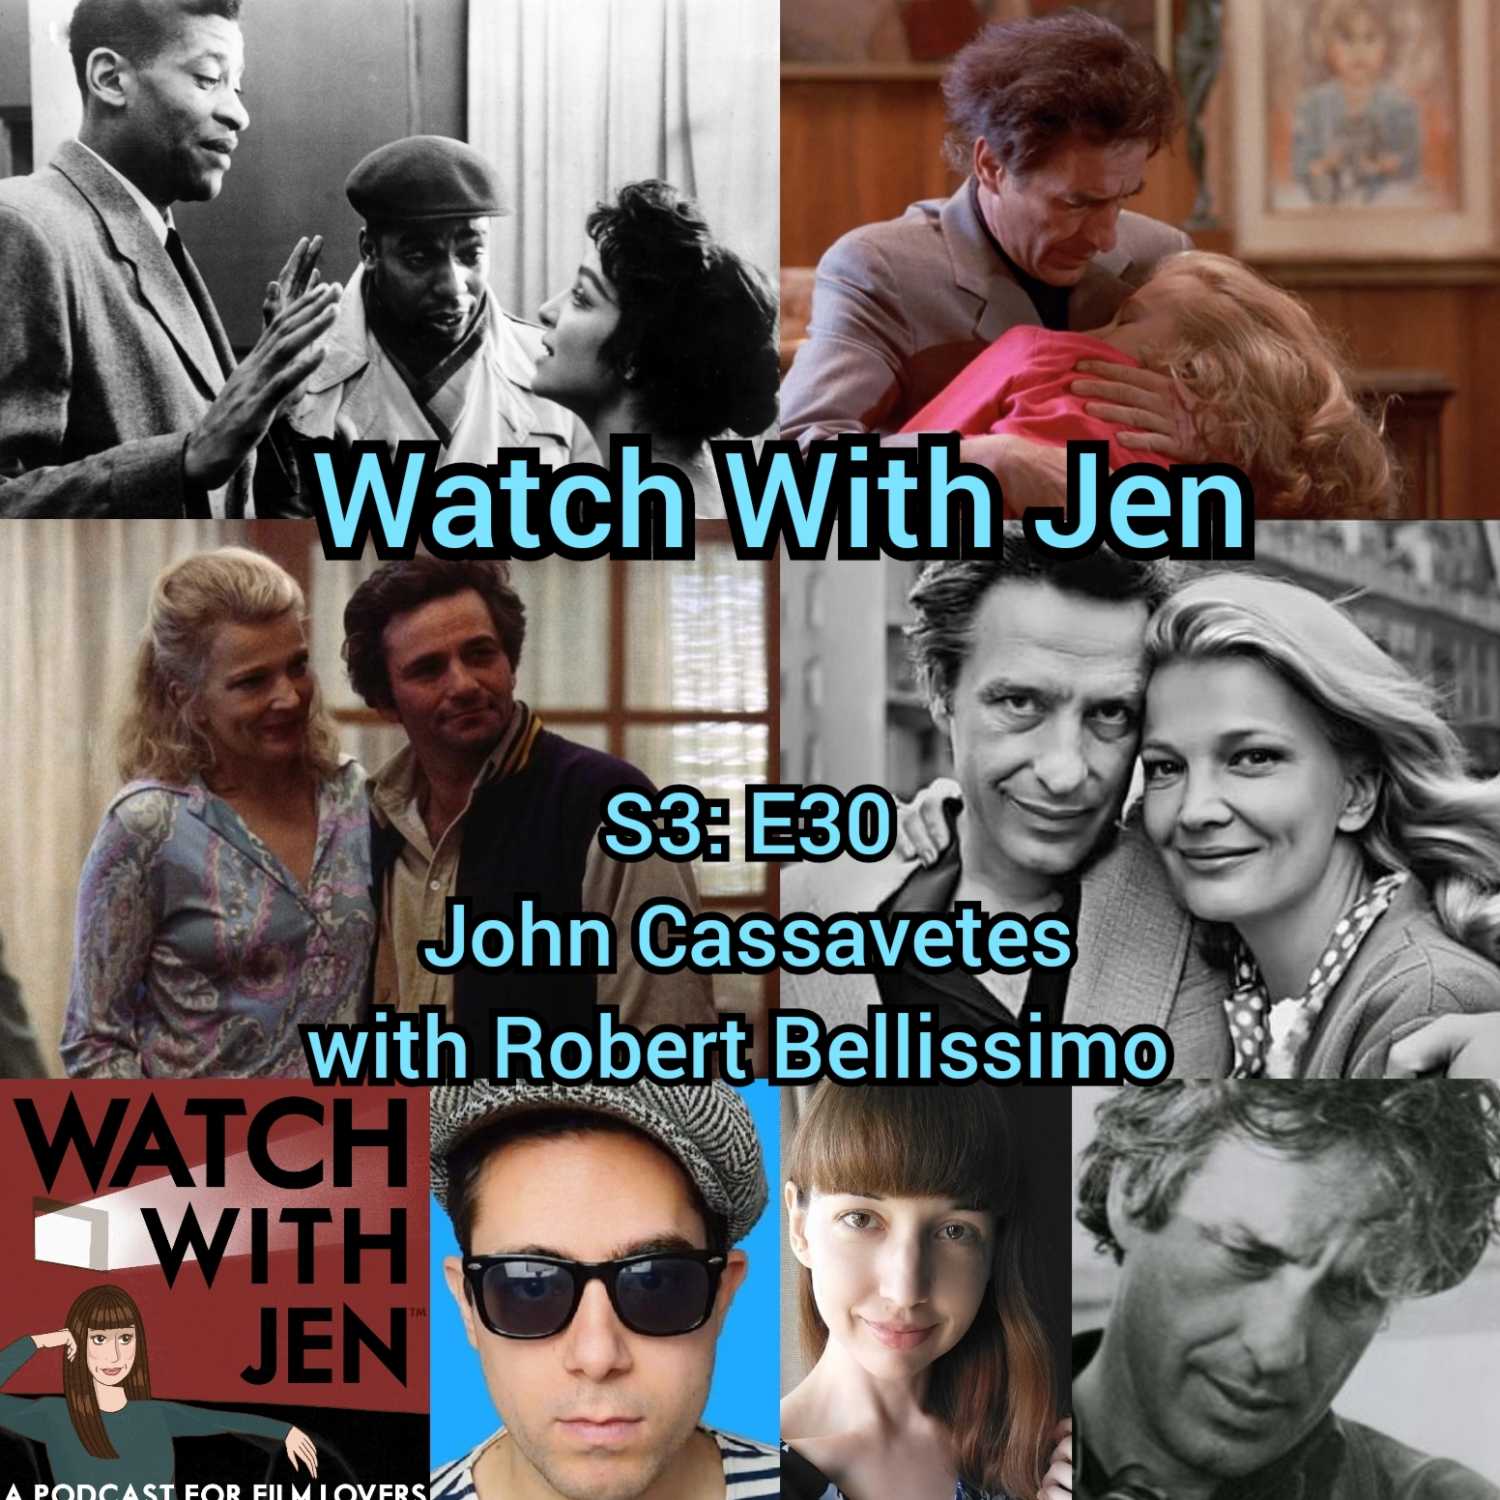 Watch With Jen - S3: E30 - John Cassavetes with Robert Bellissimo